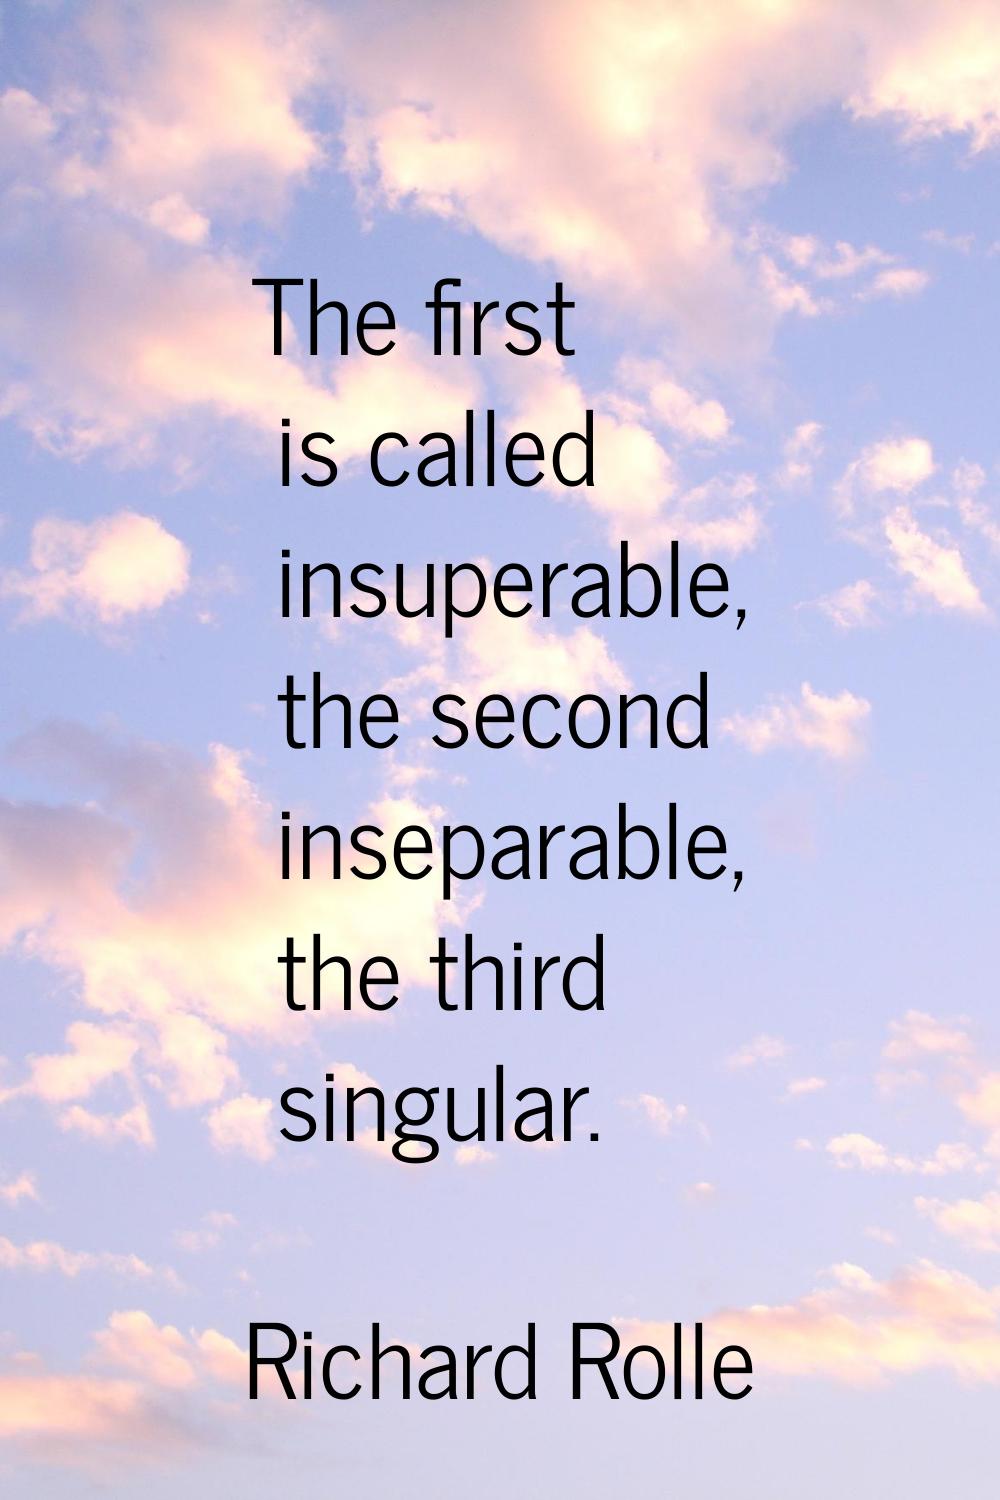 The first is called insuperable, the second inseparable, the third singular.